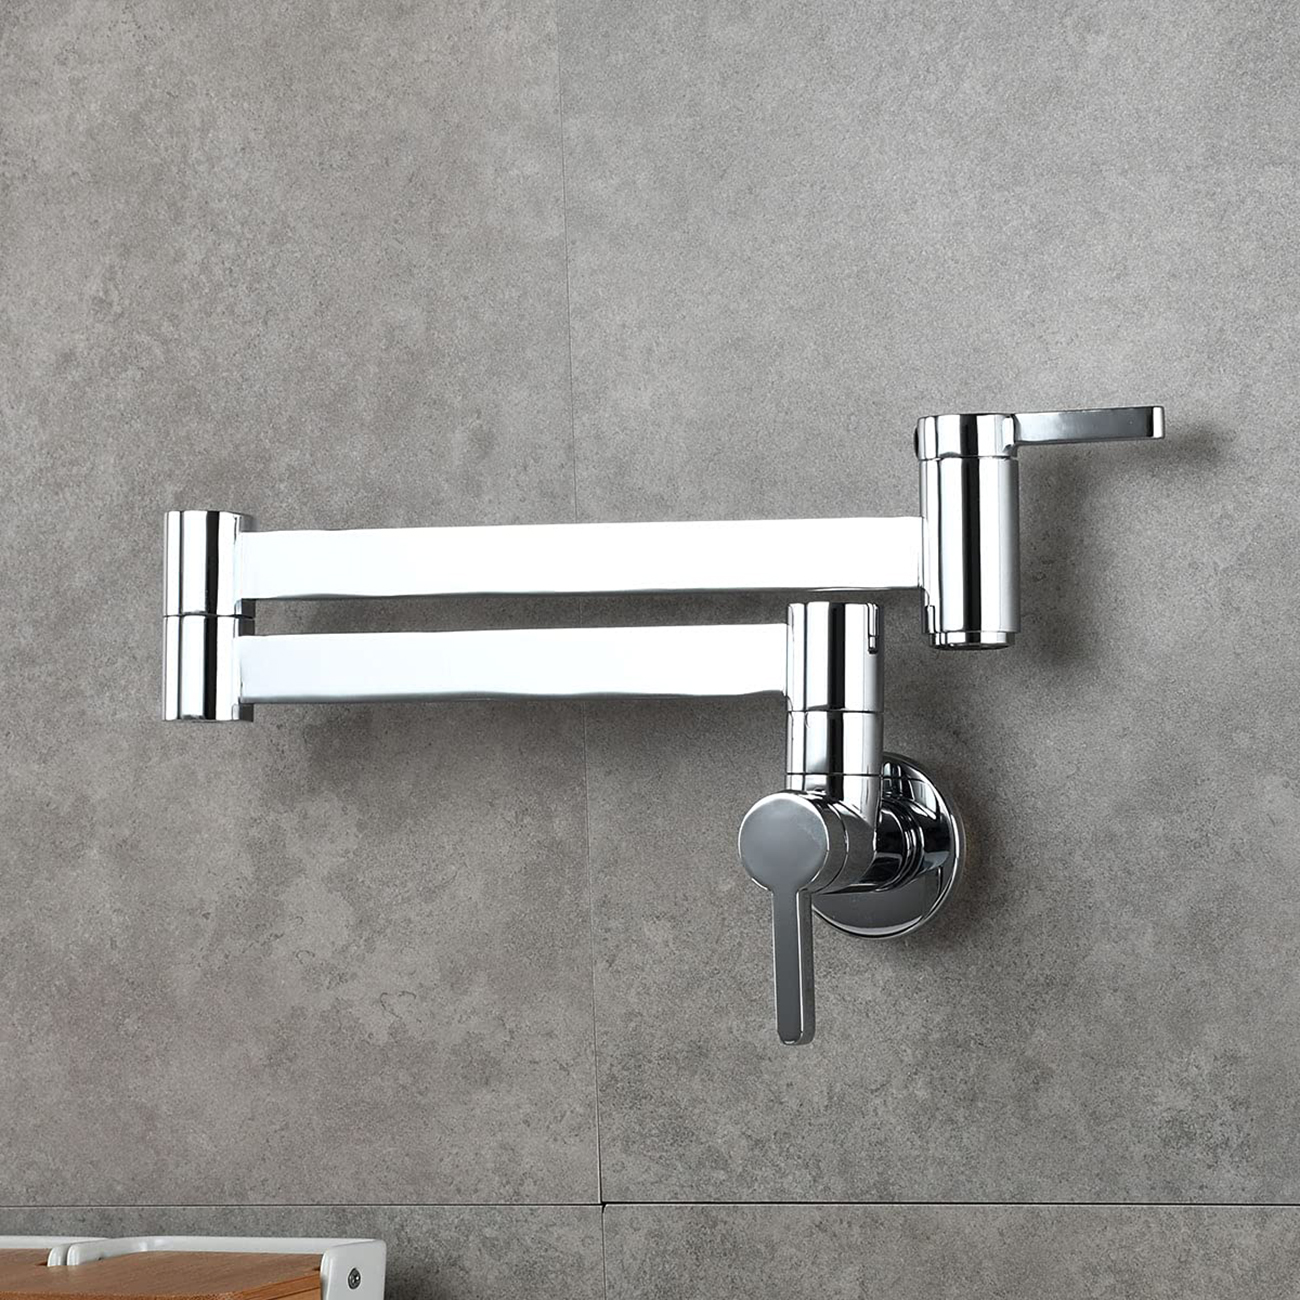 Pot Filler Faucet Wall Mount Polished Chrome Kitchen Restaurant Sink Stretchable Commercial Faucet with Folding Double Joint Swing Arm Single Hole Two Handles